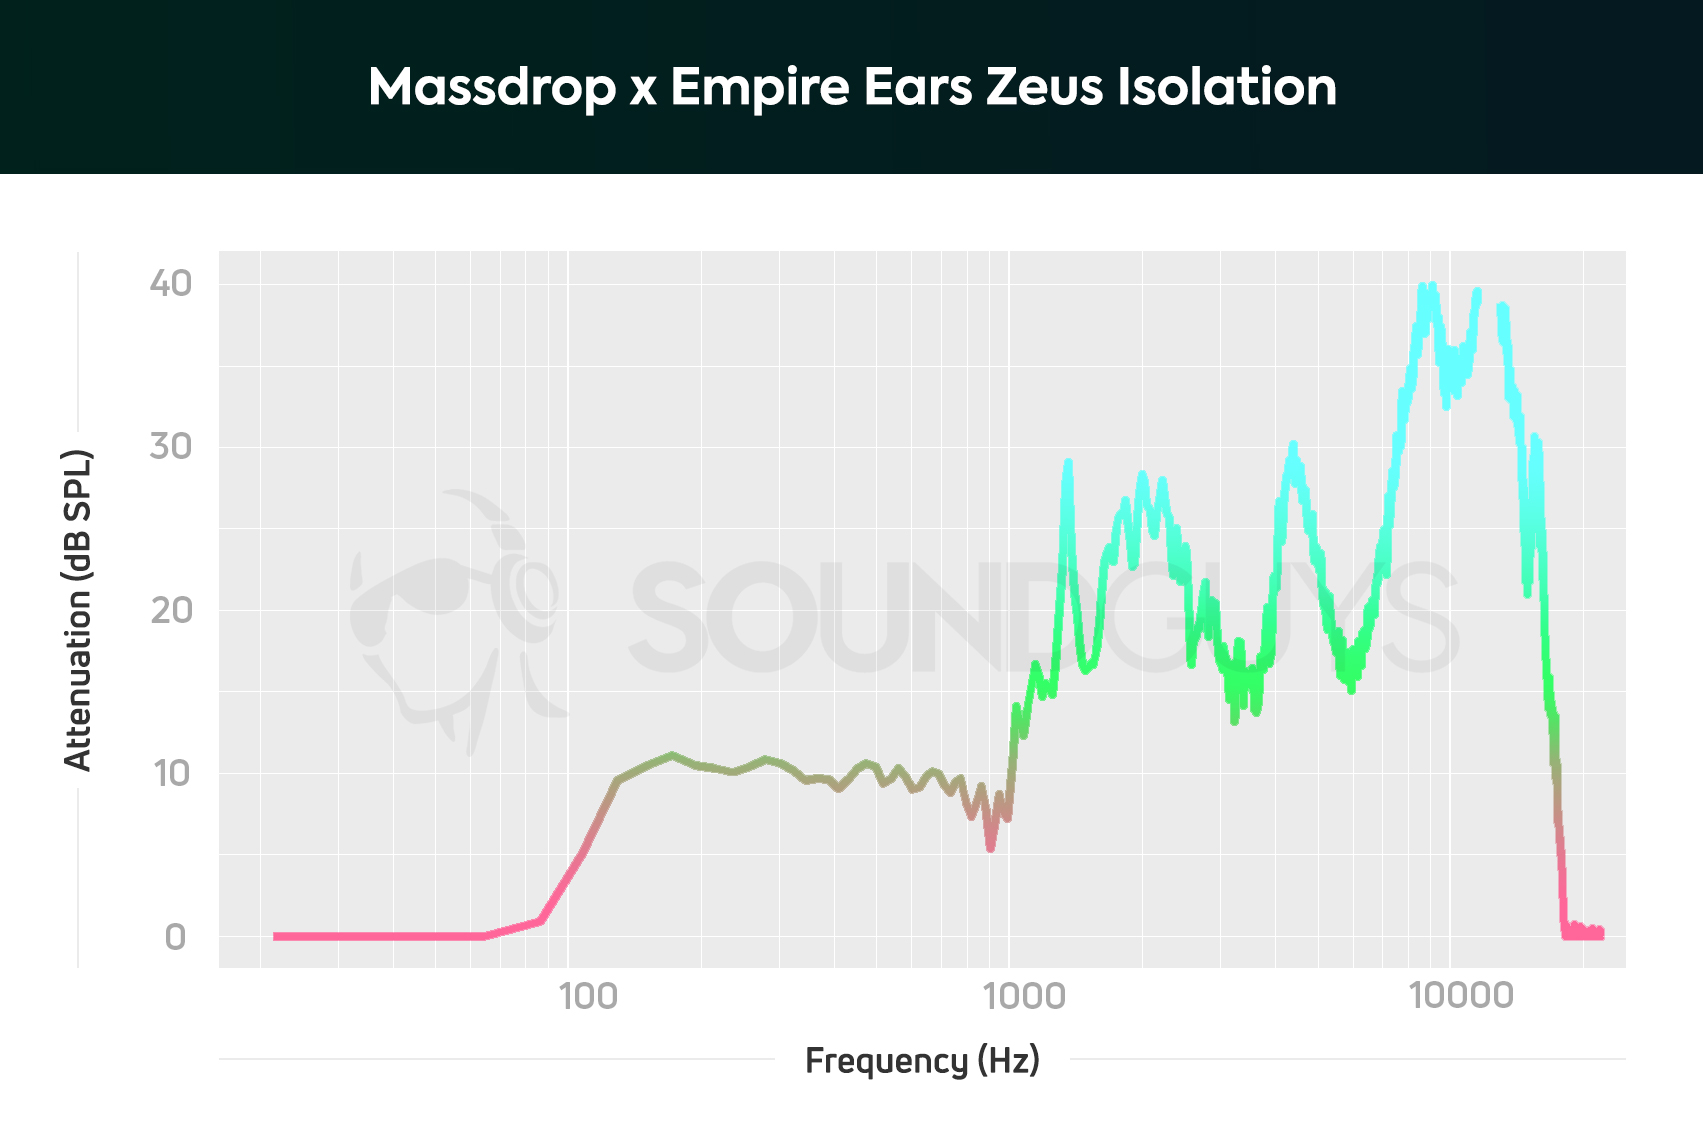 A chart depiccting the Massdrop x Empire Ears Zeus earbuds isolation performance.